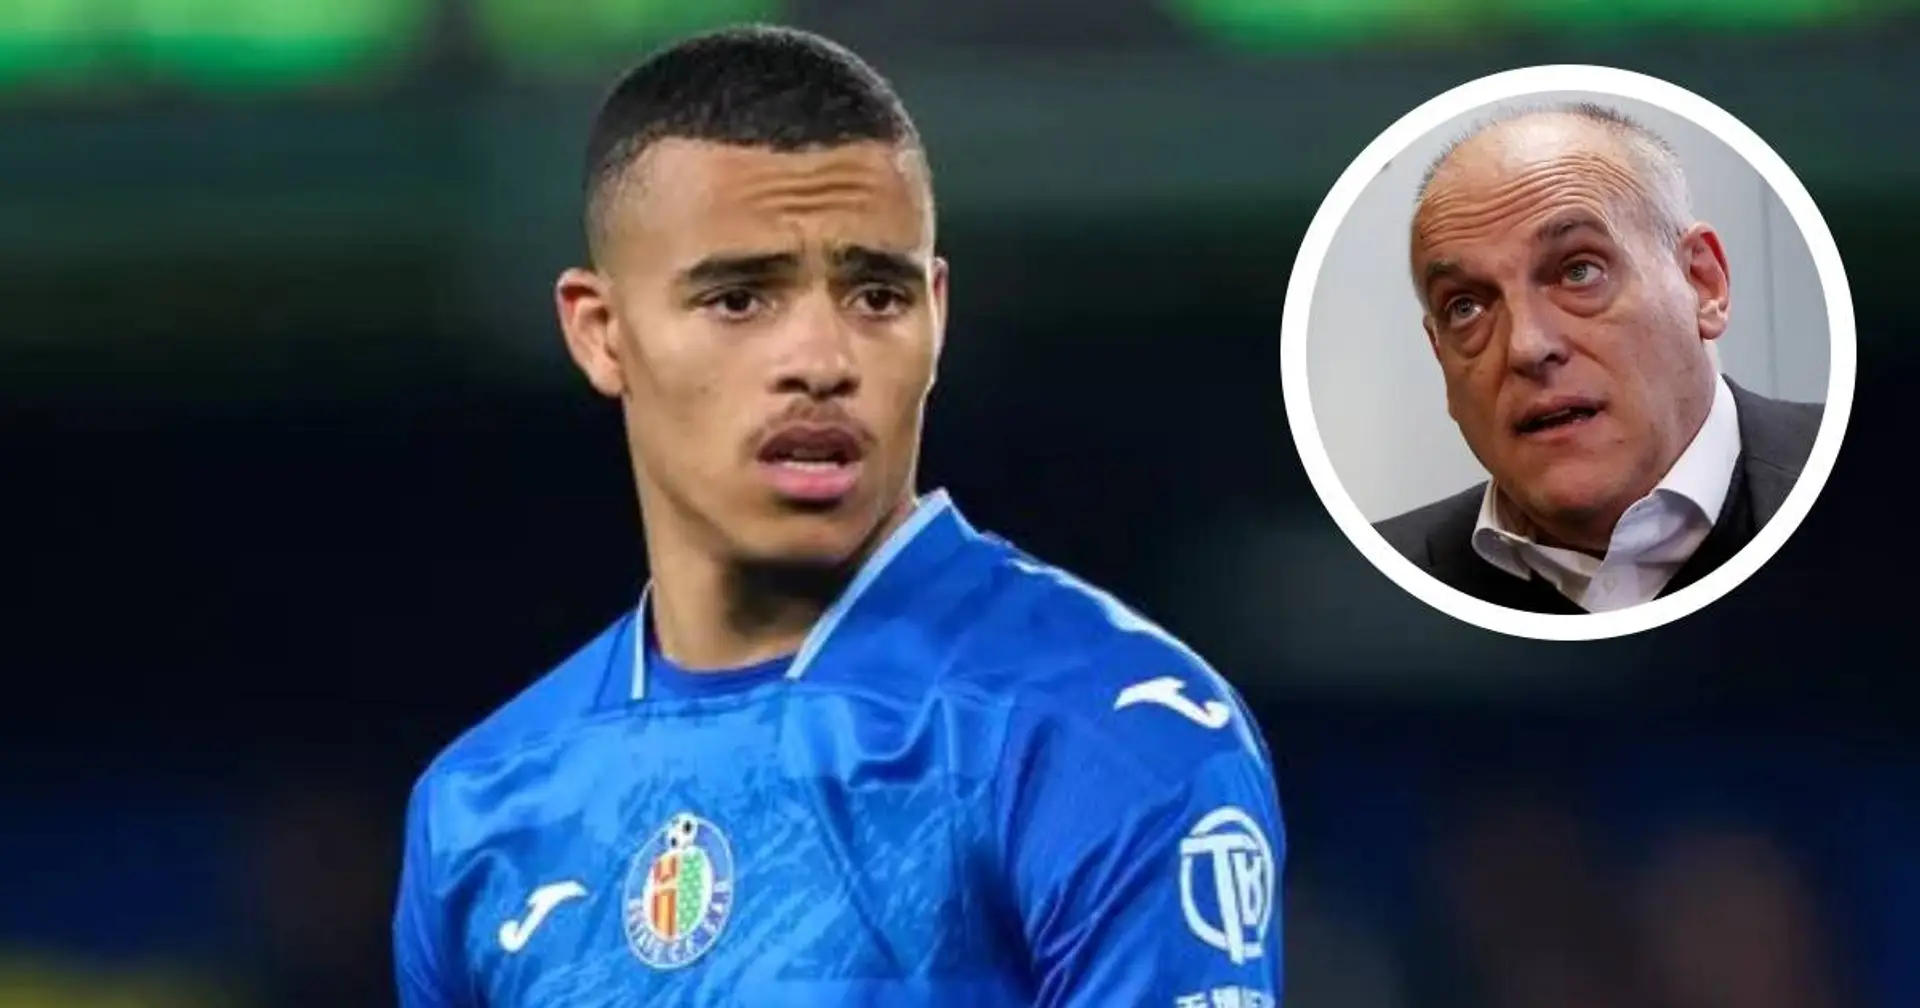 'He wasn't condemned, I don't care': LaLiga president wants Mason Greenwood to stay in Spain